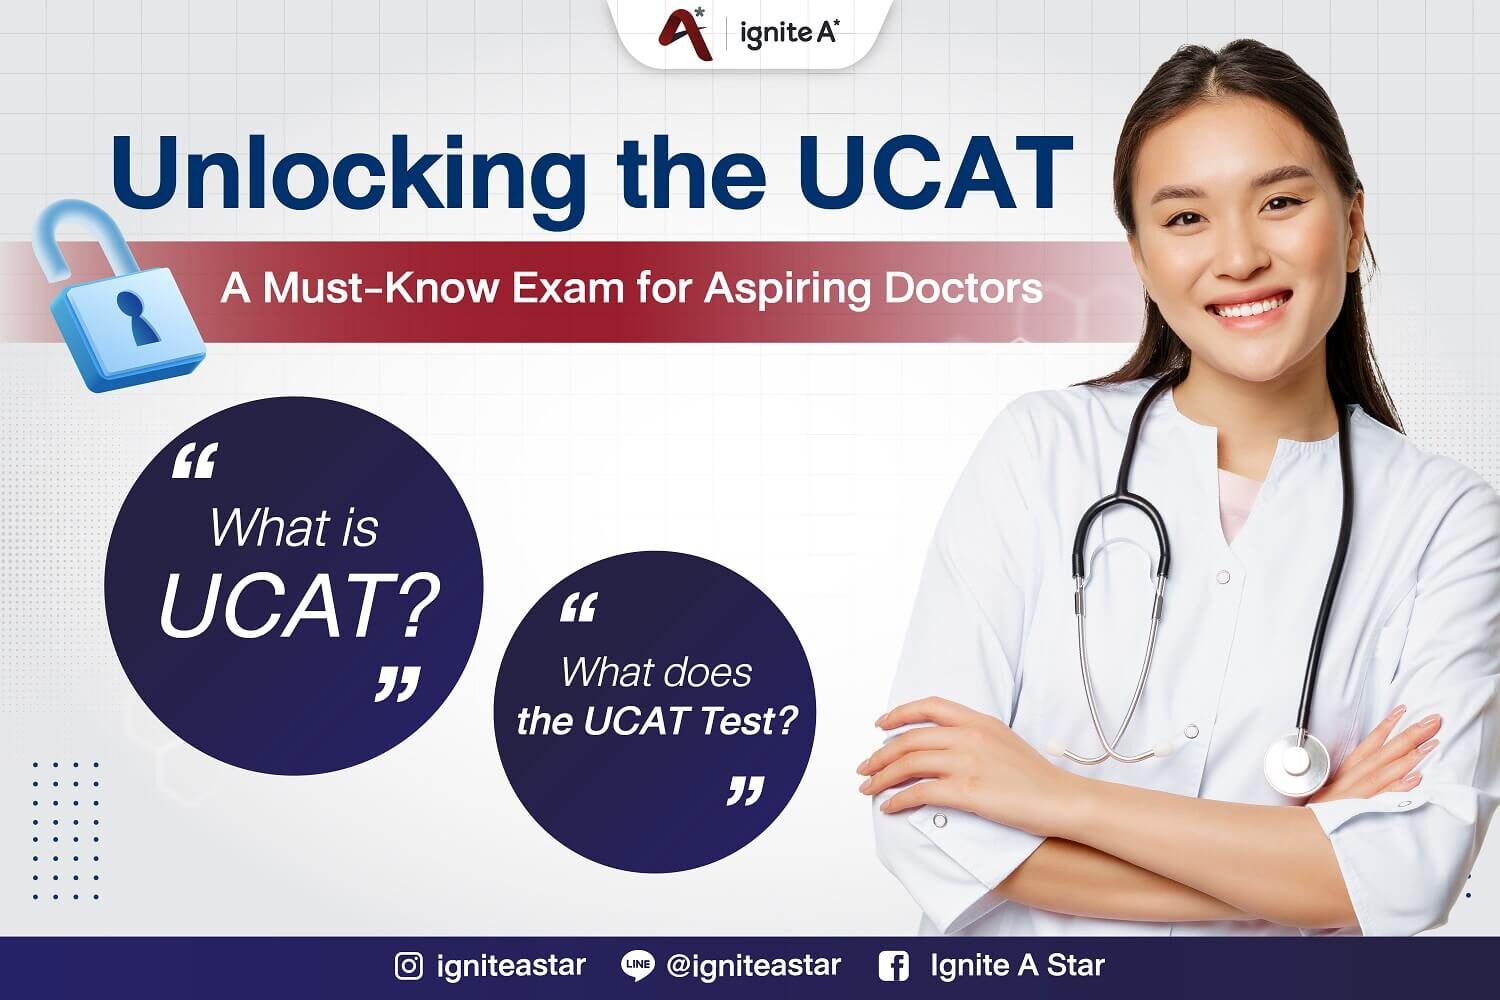 unlocking the UCAT, the must know exam for aspiring doctors.